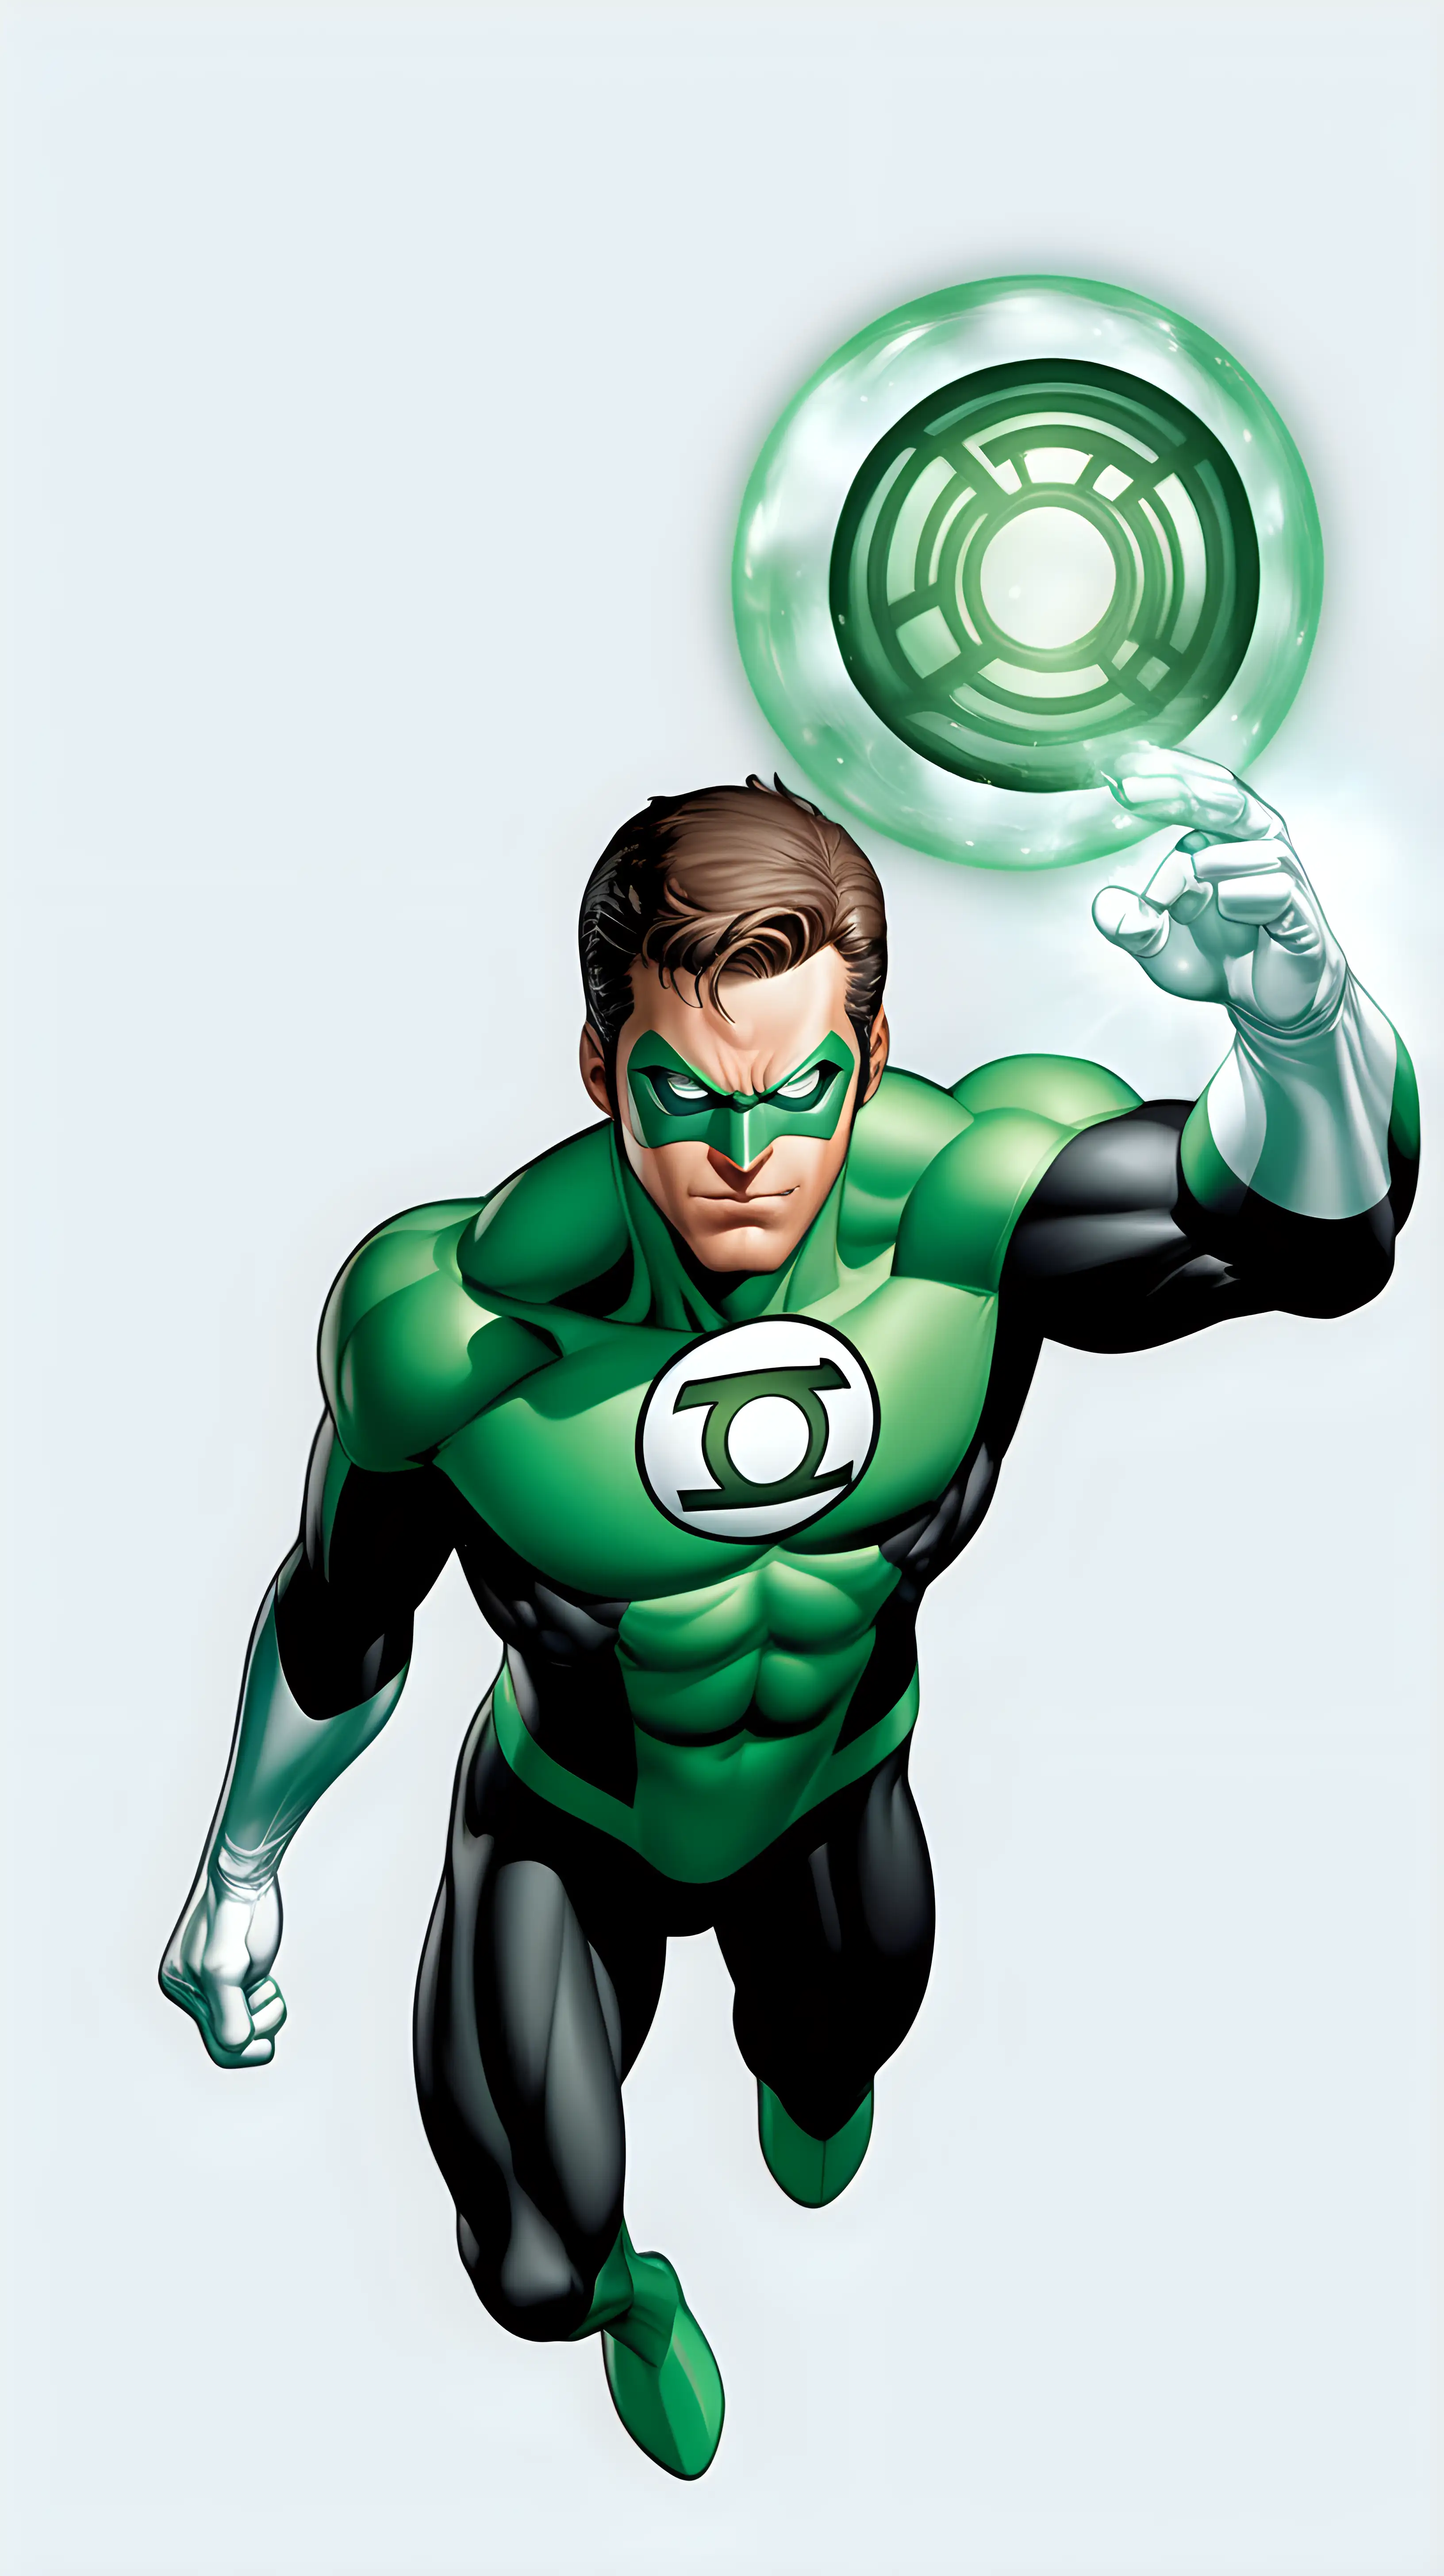 anime green lantern floating in the air with clear background